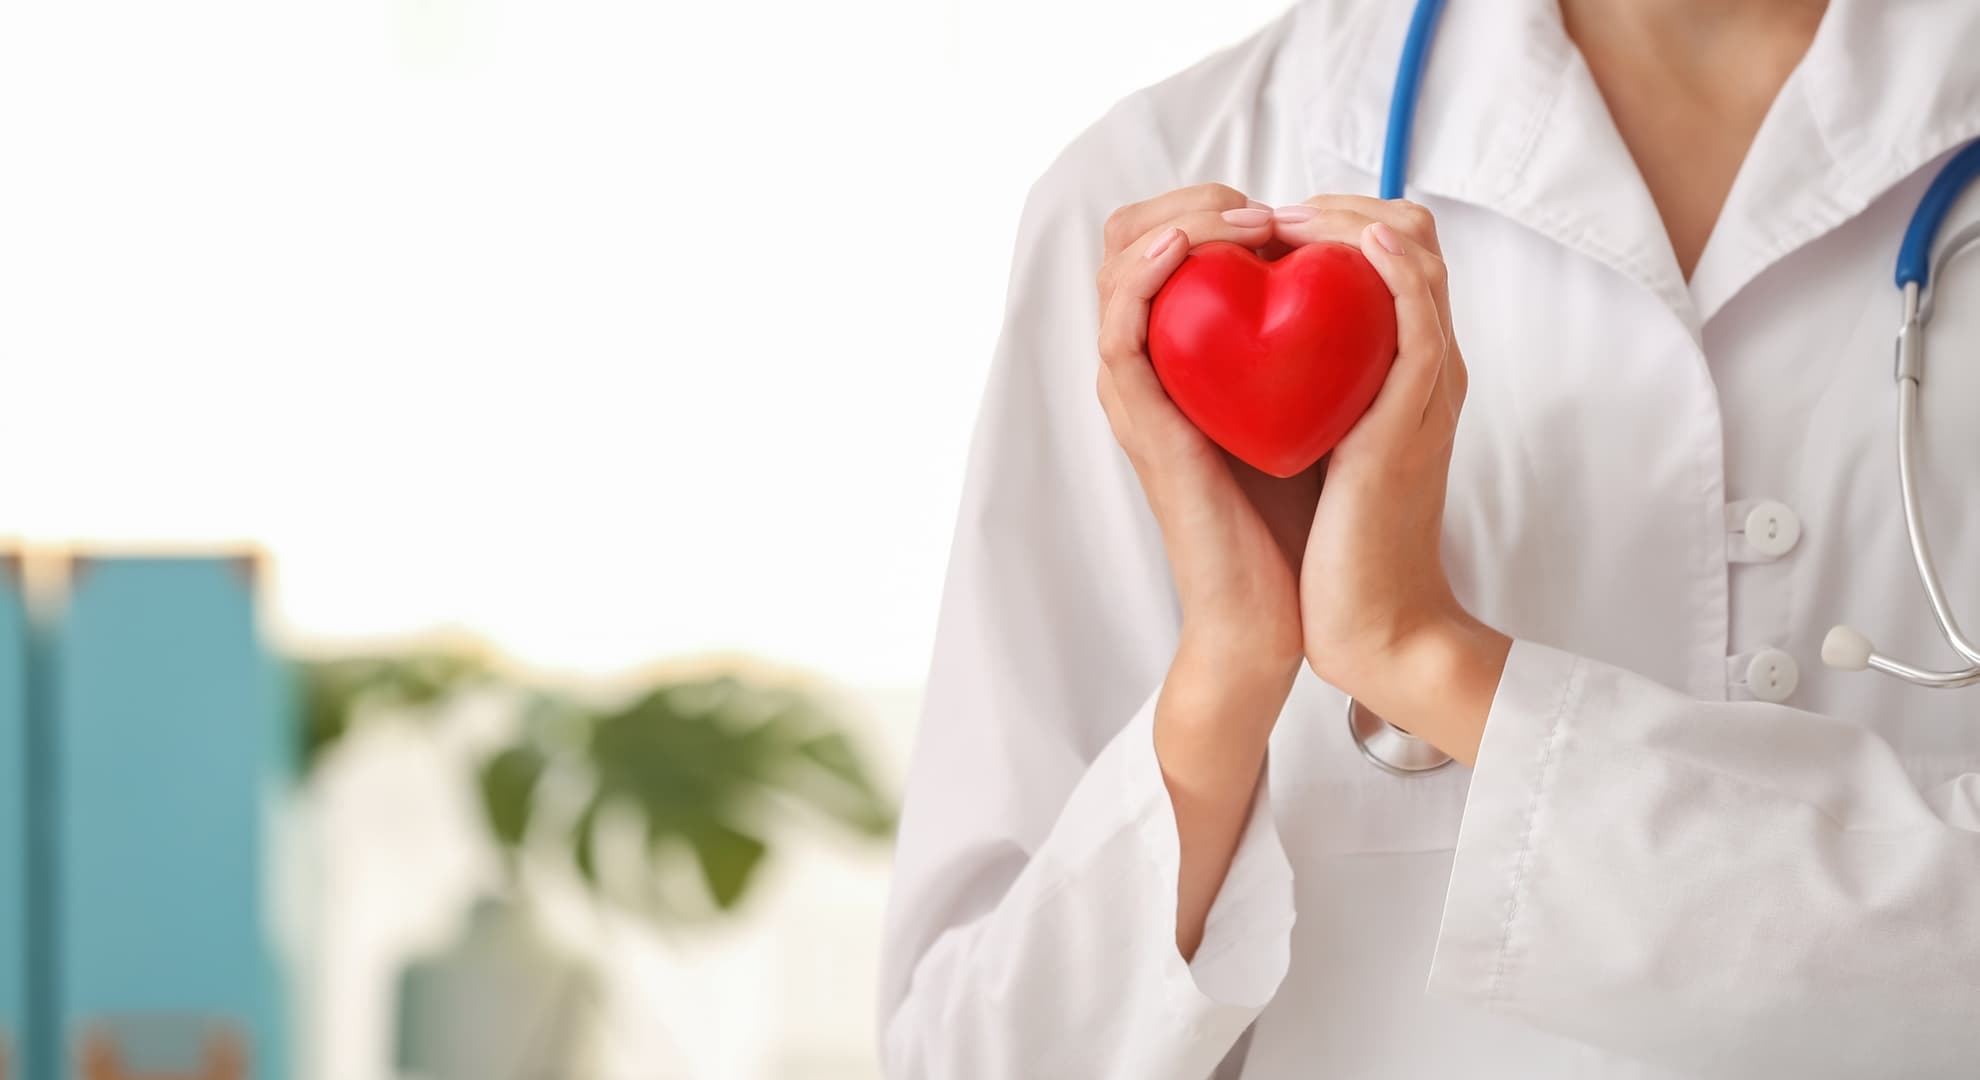 Doctor holding a heart symbol